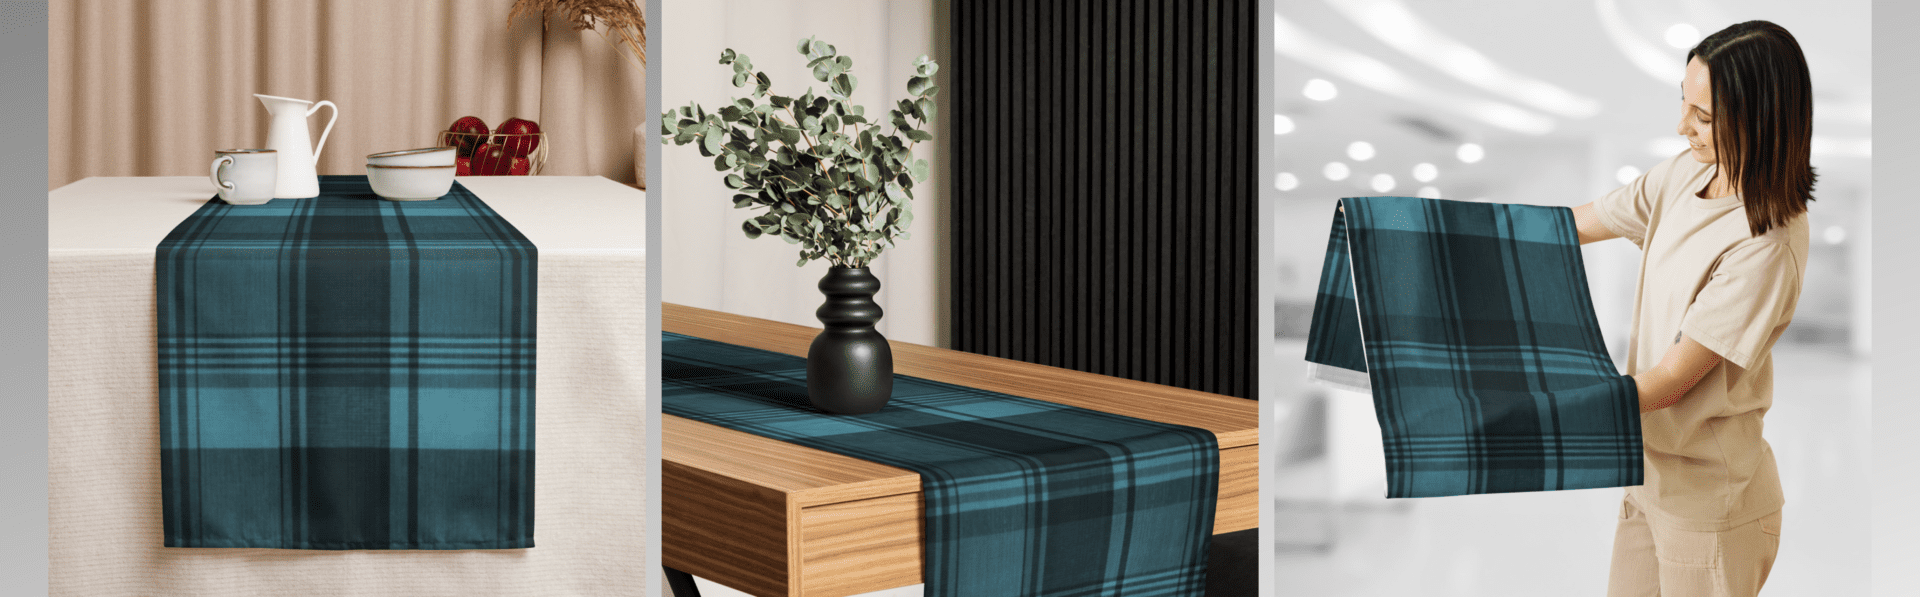 Teal and black plaid table runner.